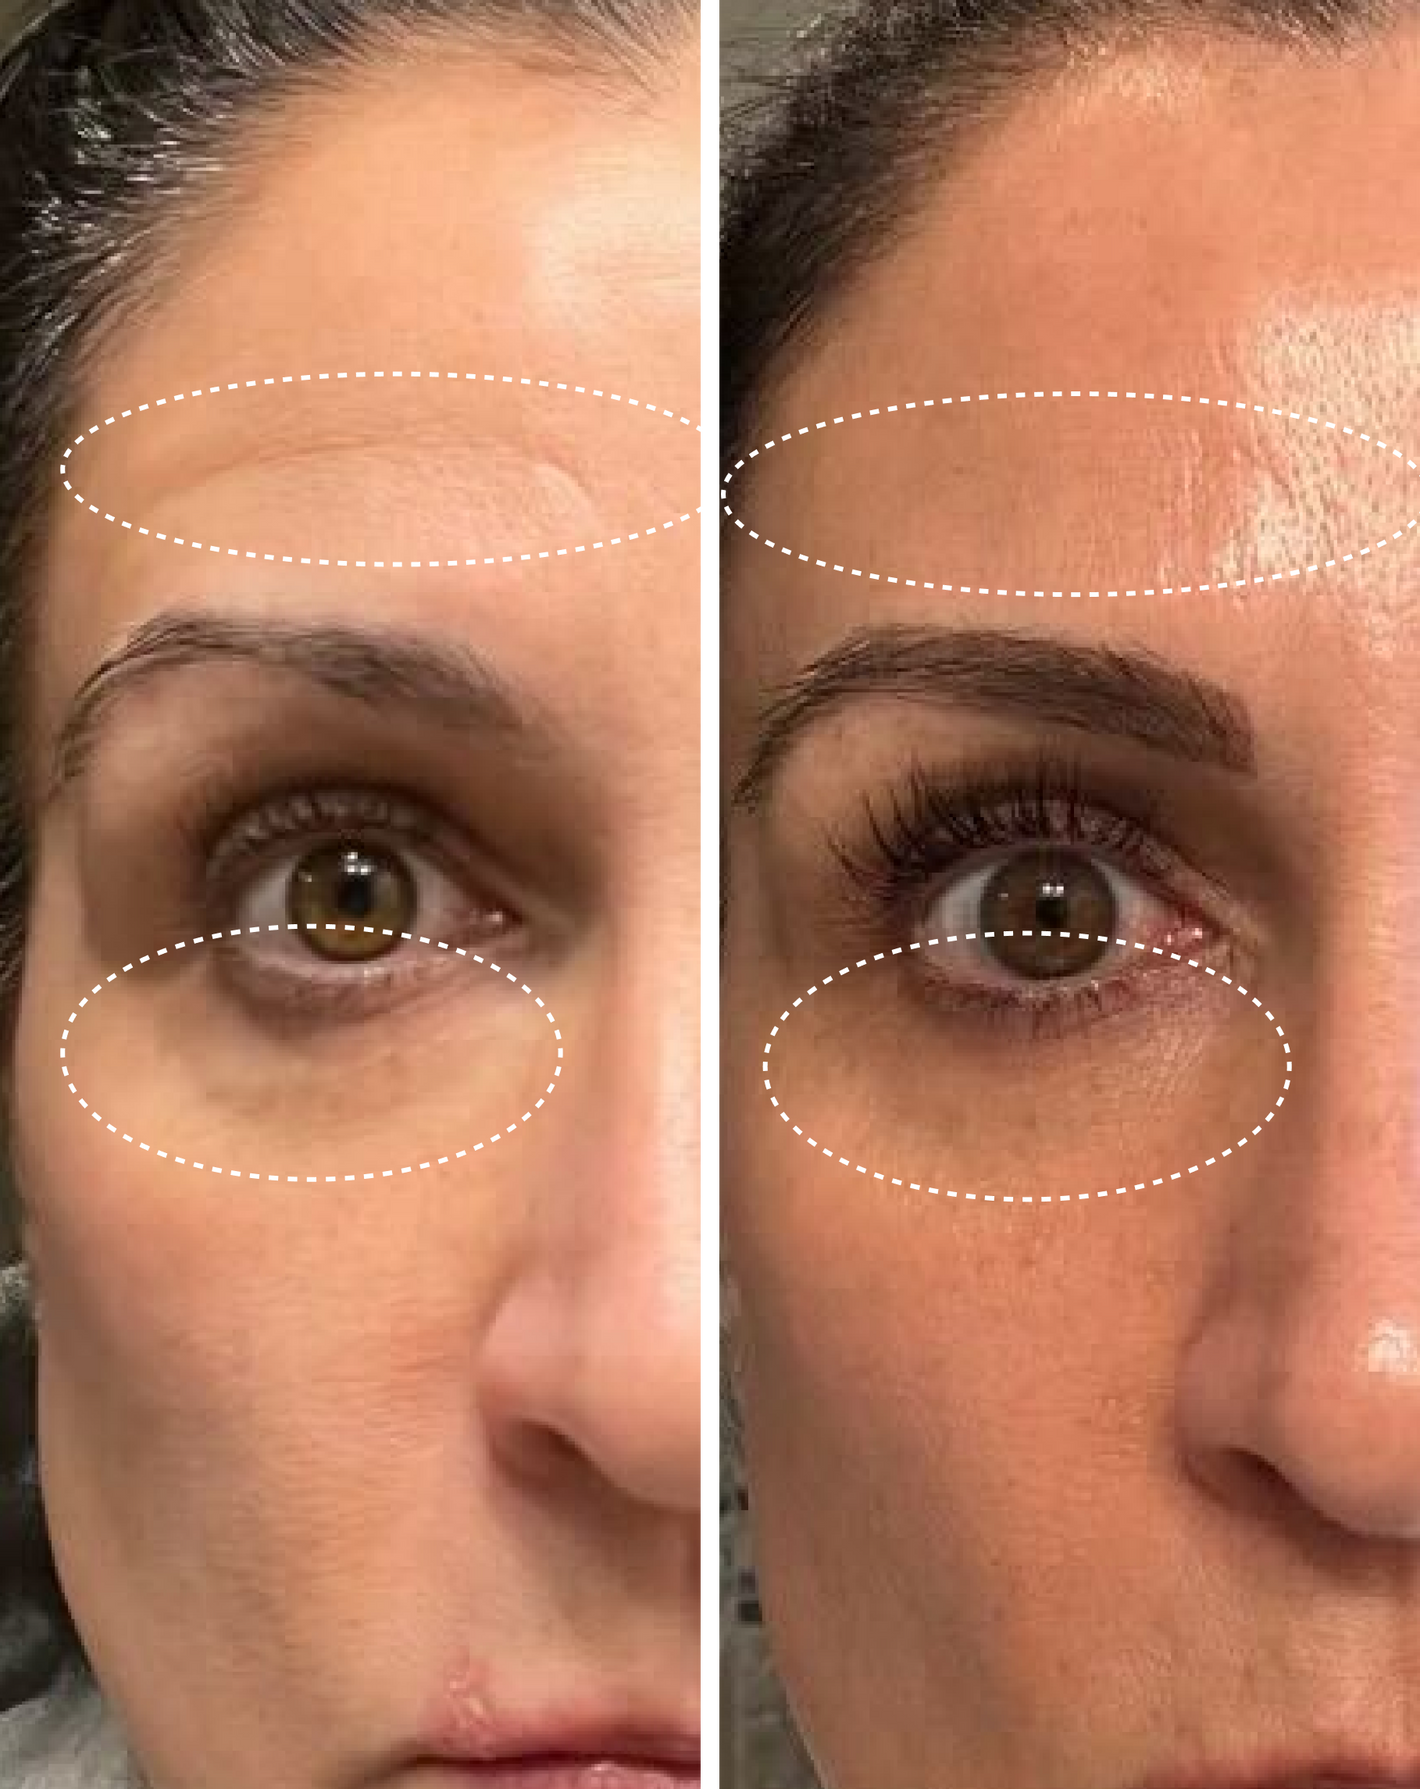 Two side by side images of a female-presenting person showing skin before and after 2 weeks use of Droplette Collagen Hydrofiller